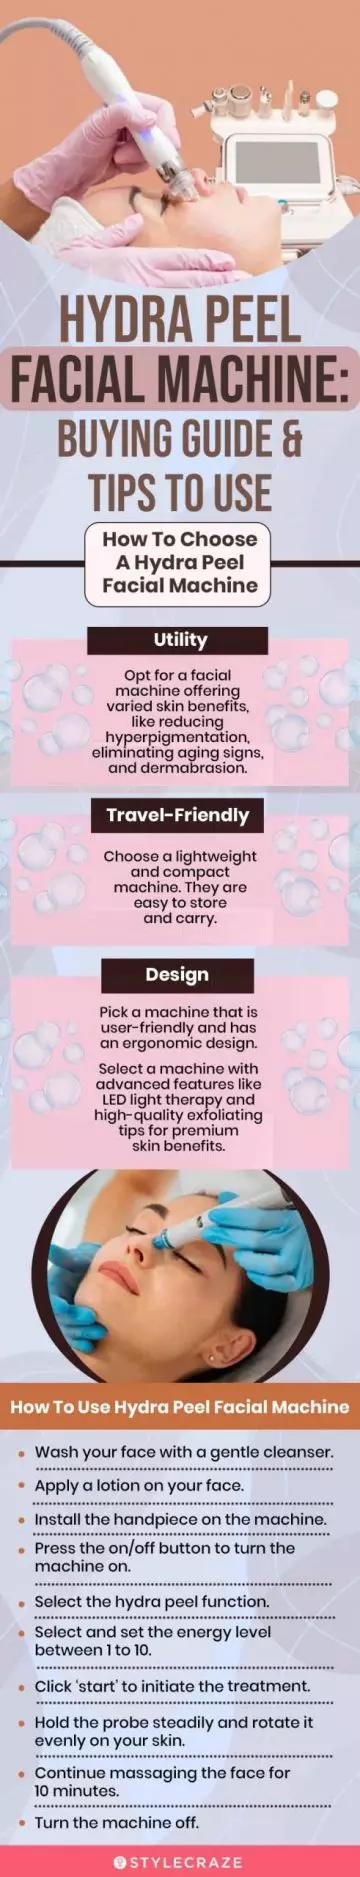 Hydra Peel Facial Machine: Buying Guide & Tips To Use (infographic)